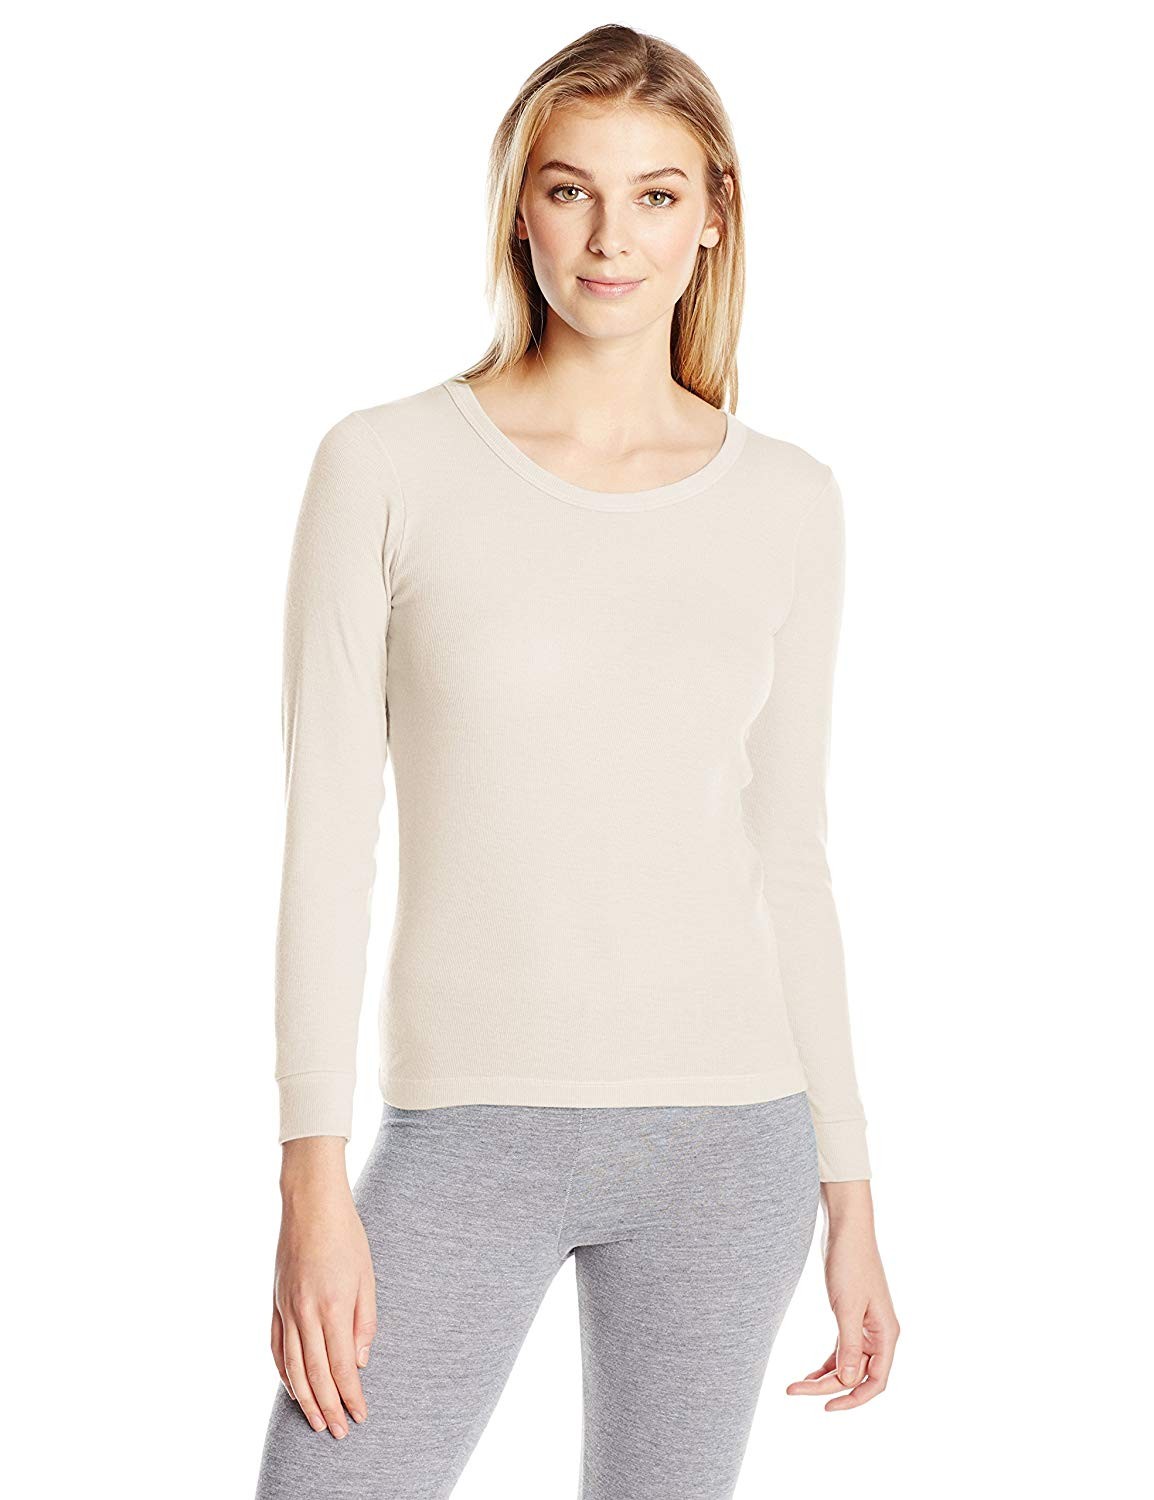 Women's Performance Rib Knit Thermal Underwear Top with Silvadur - Nude ...